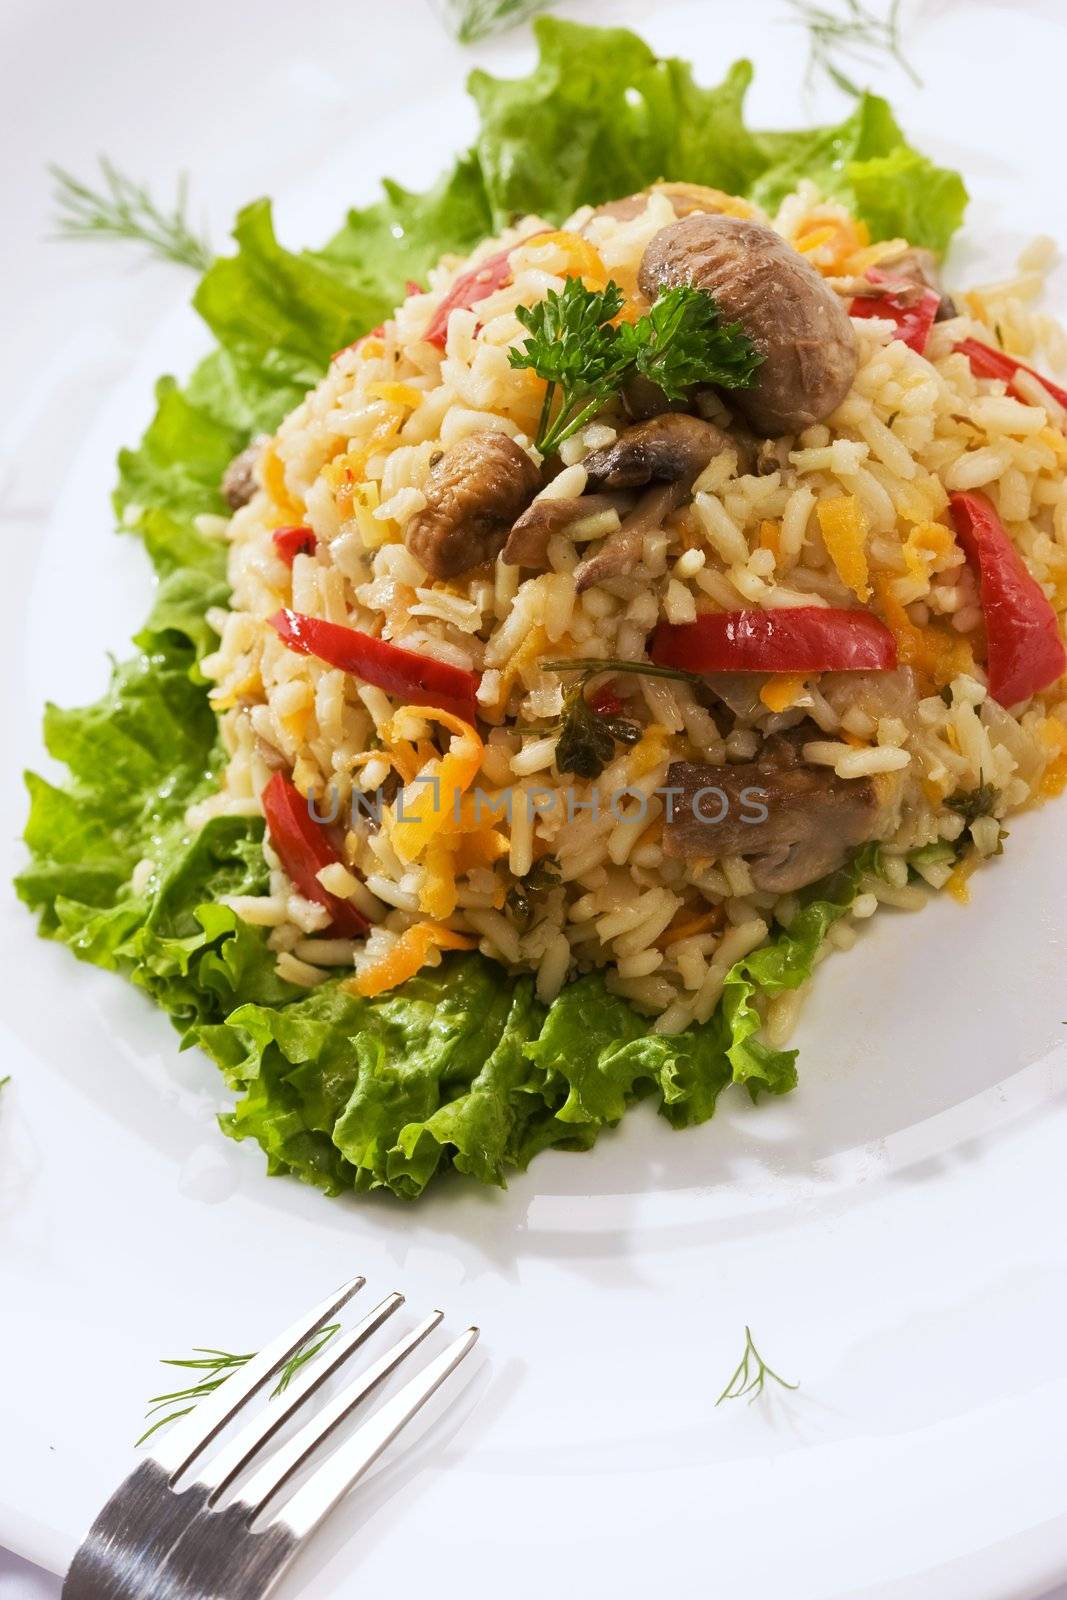 Italian risotto by agg